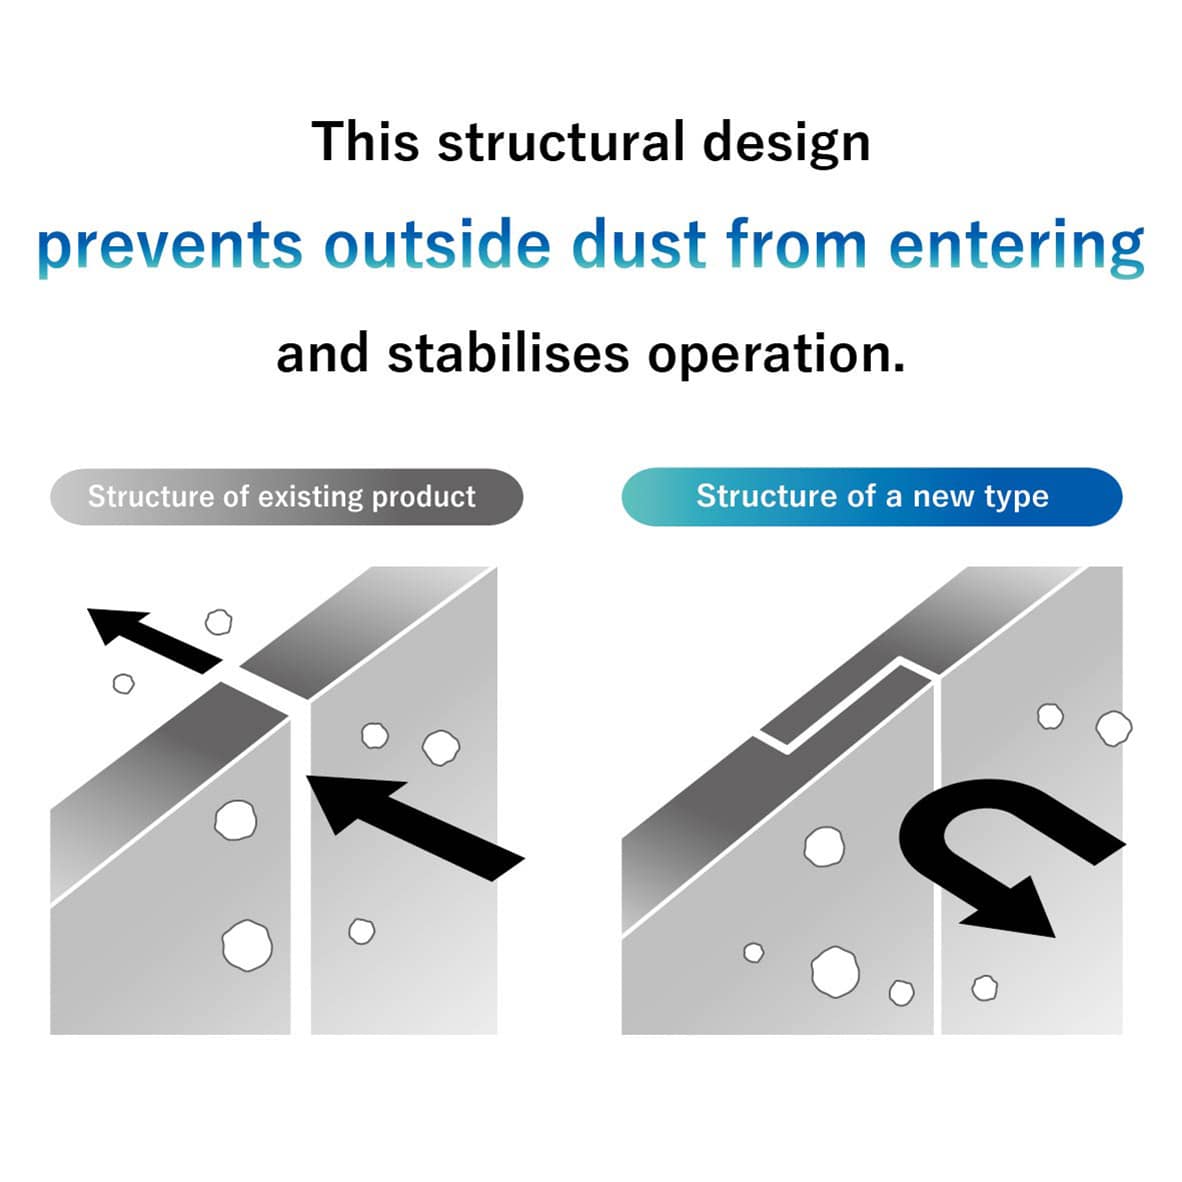 This structural design prevents outside dust from entering and stabilises operation.